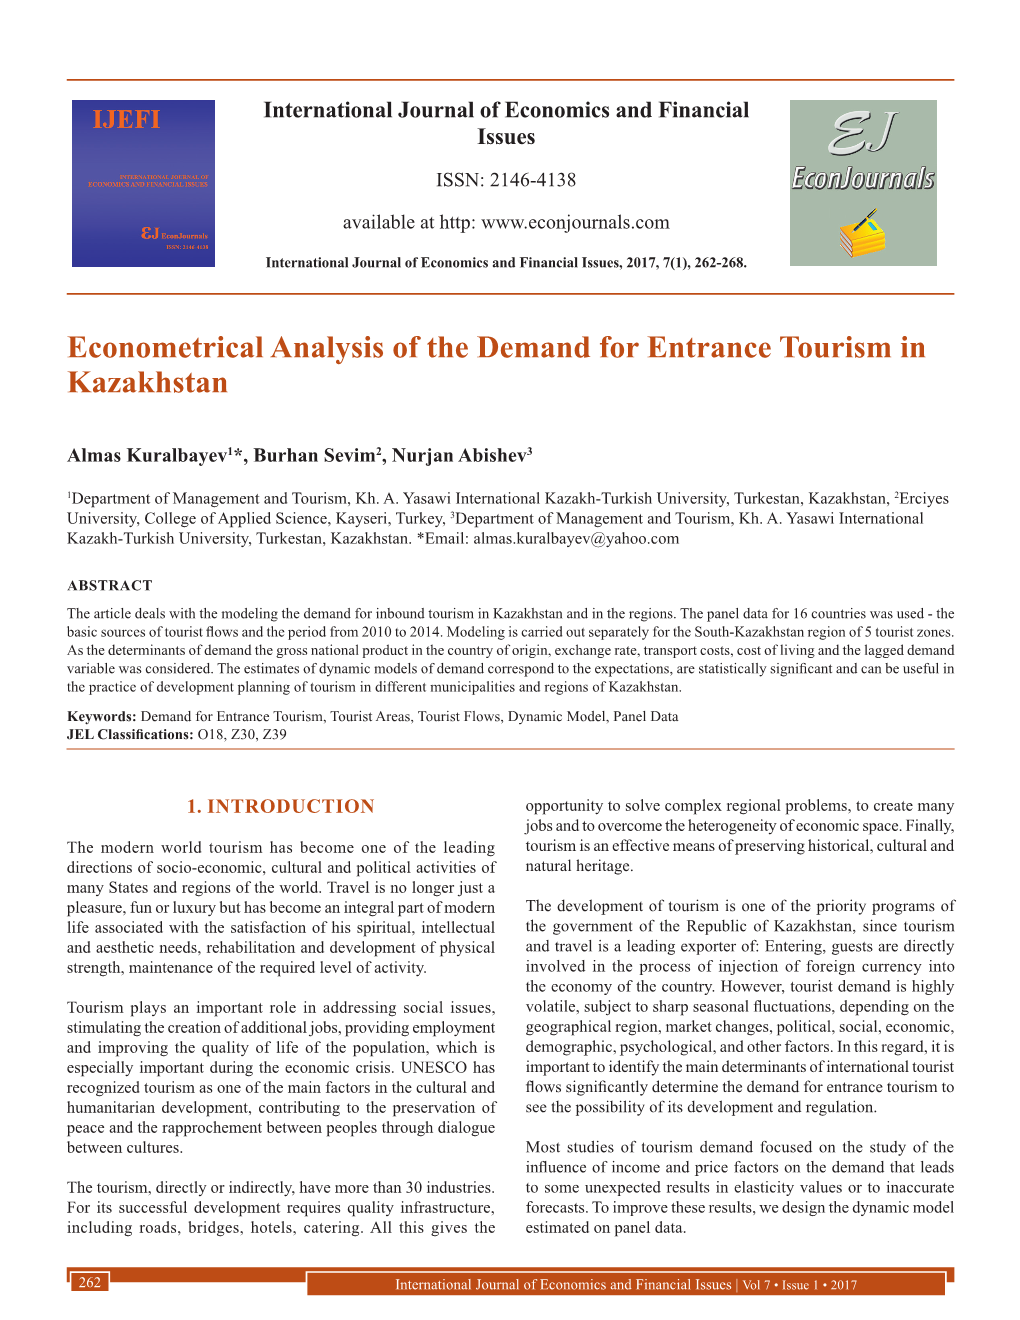 Econometrical Analysis of the Demand for Entrance Tourism in Kazakhstan